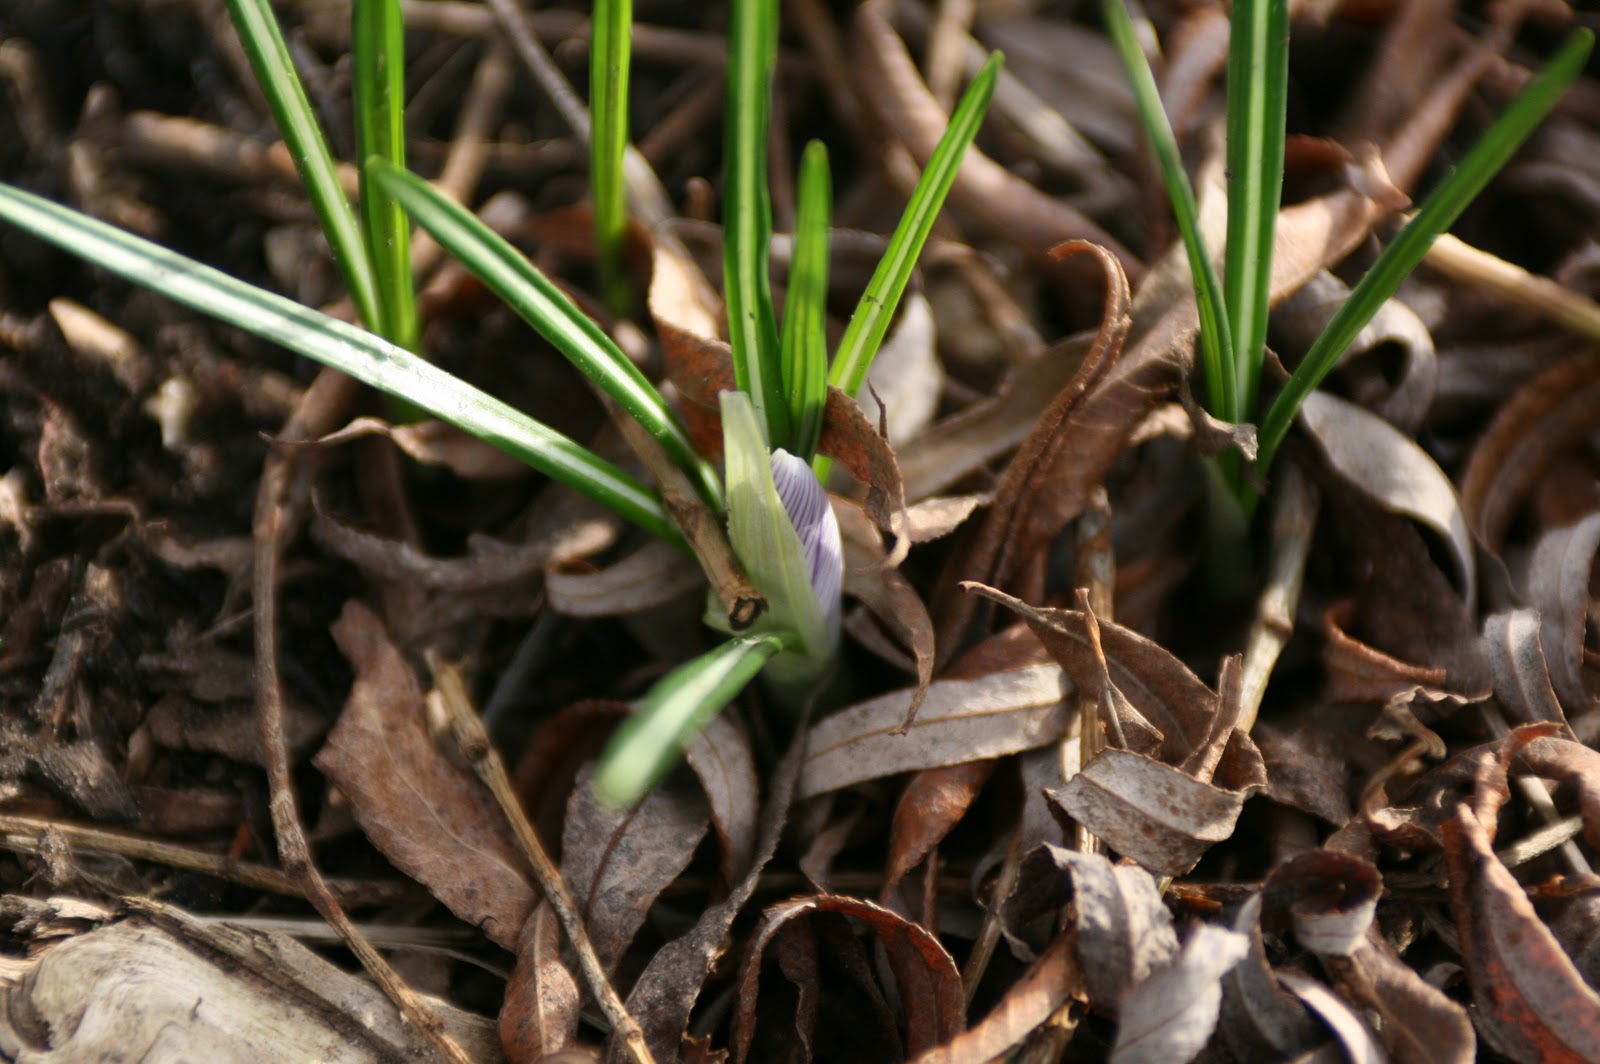 Crocus flower about to bloom